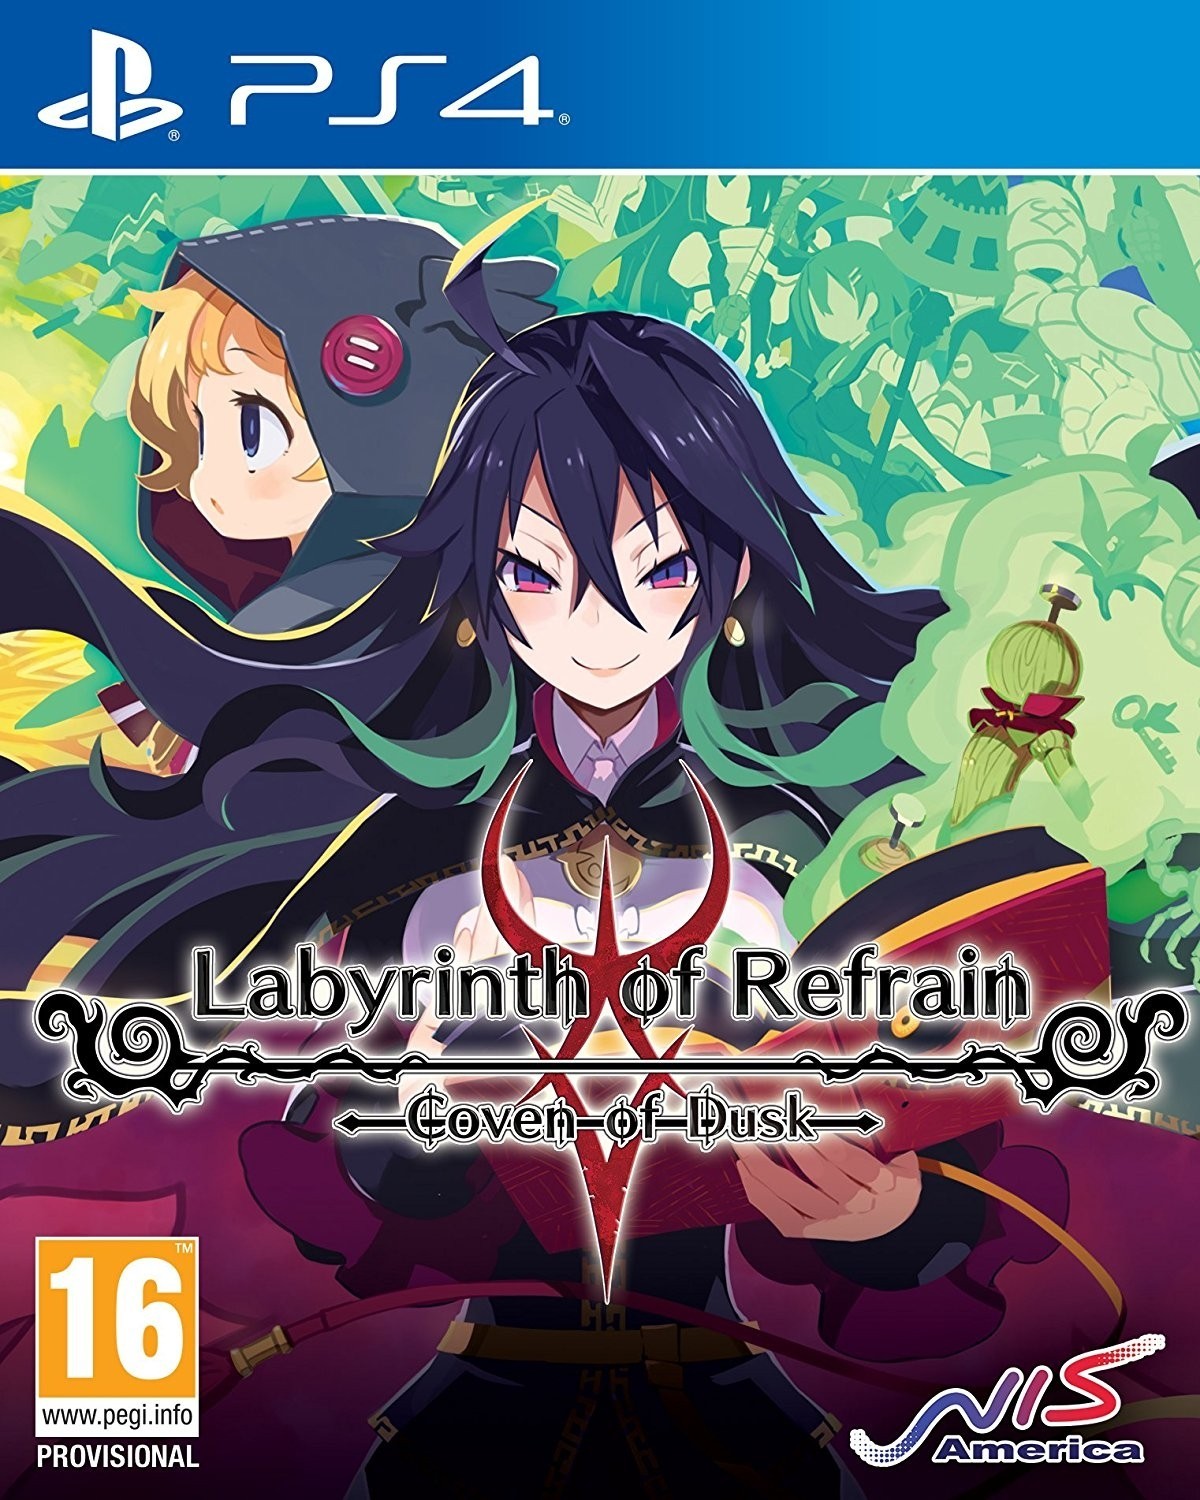 Labyrinth of Refrain: Coven of Dusk (PS4), Nippon Ichi Software